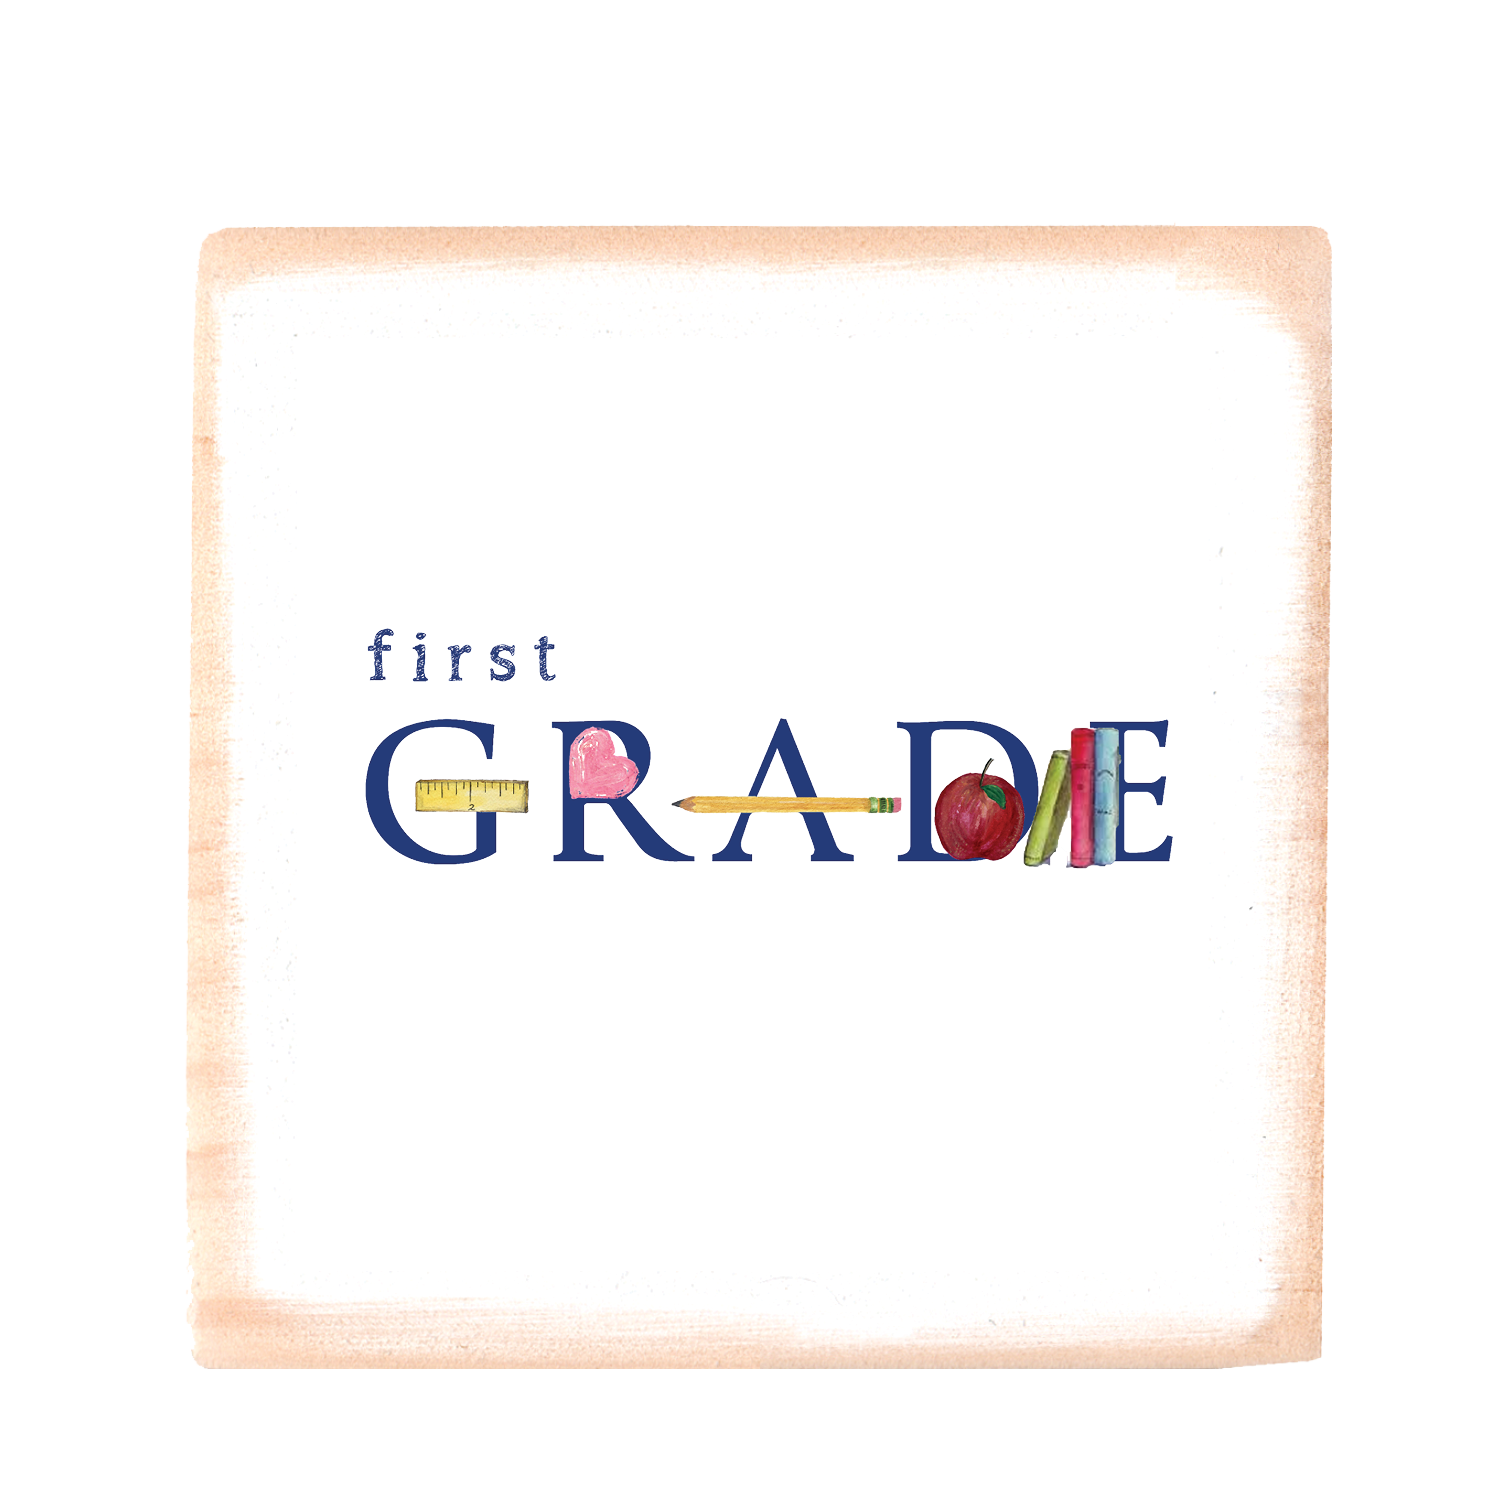 first grade square wood block